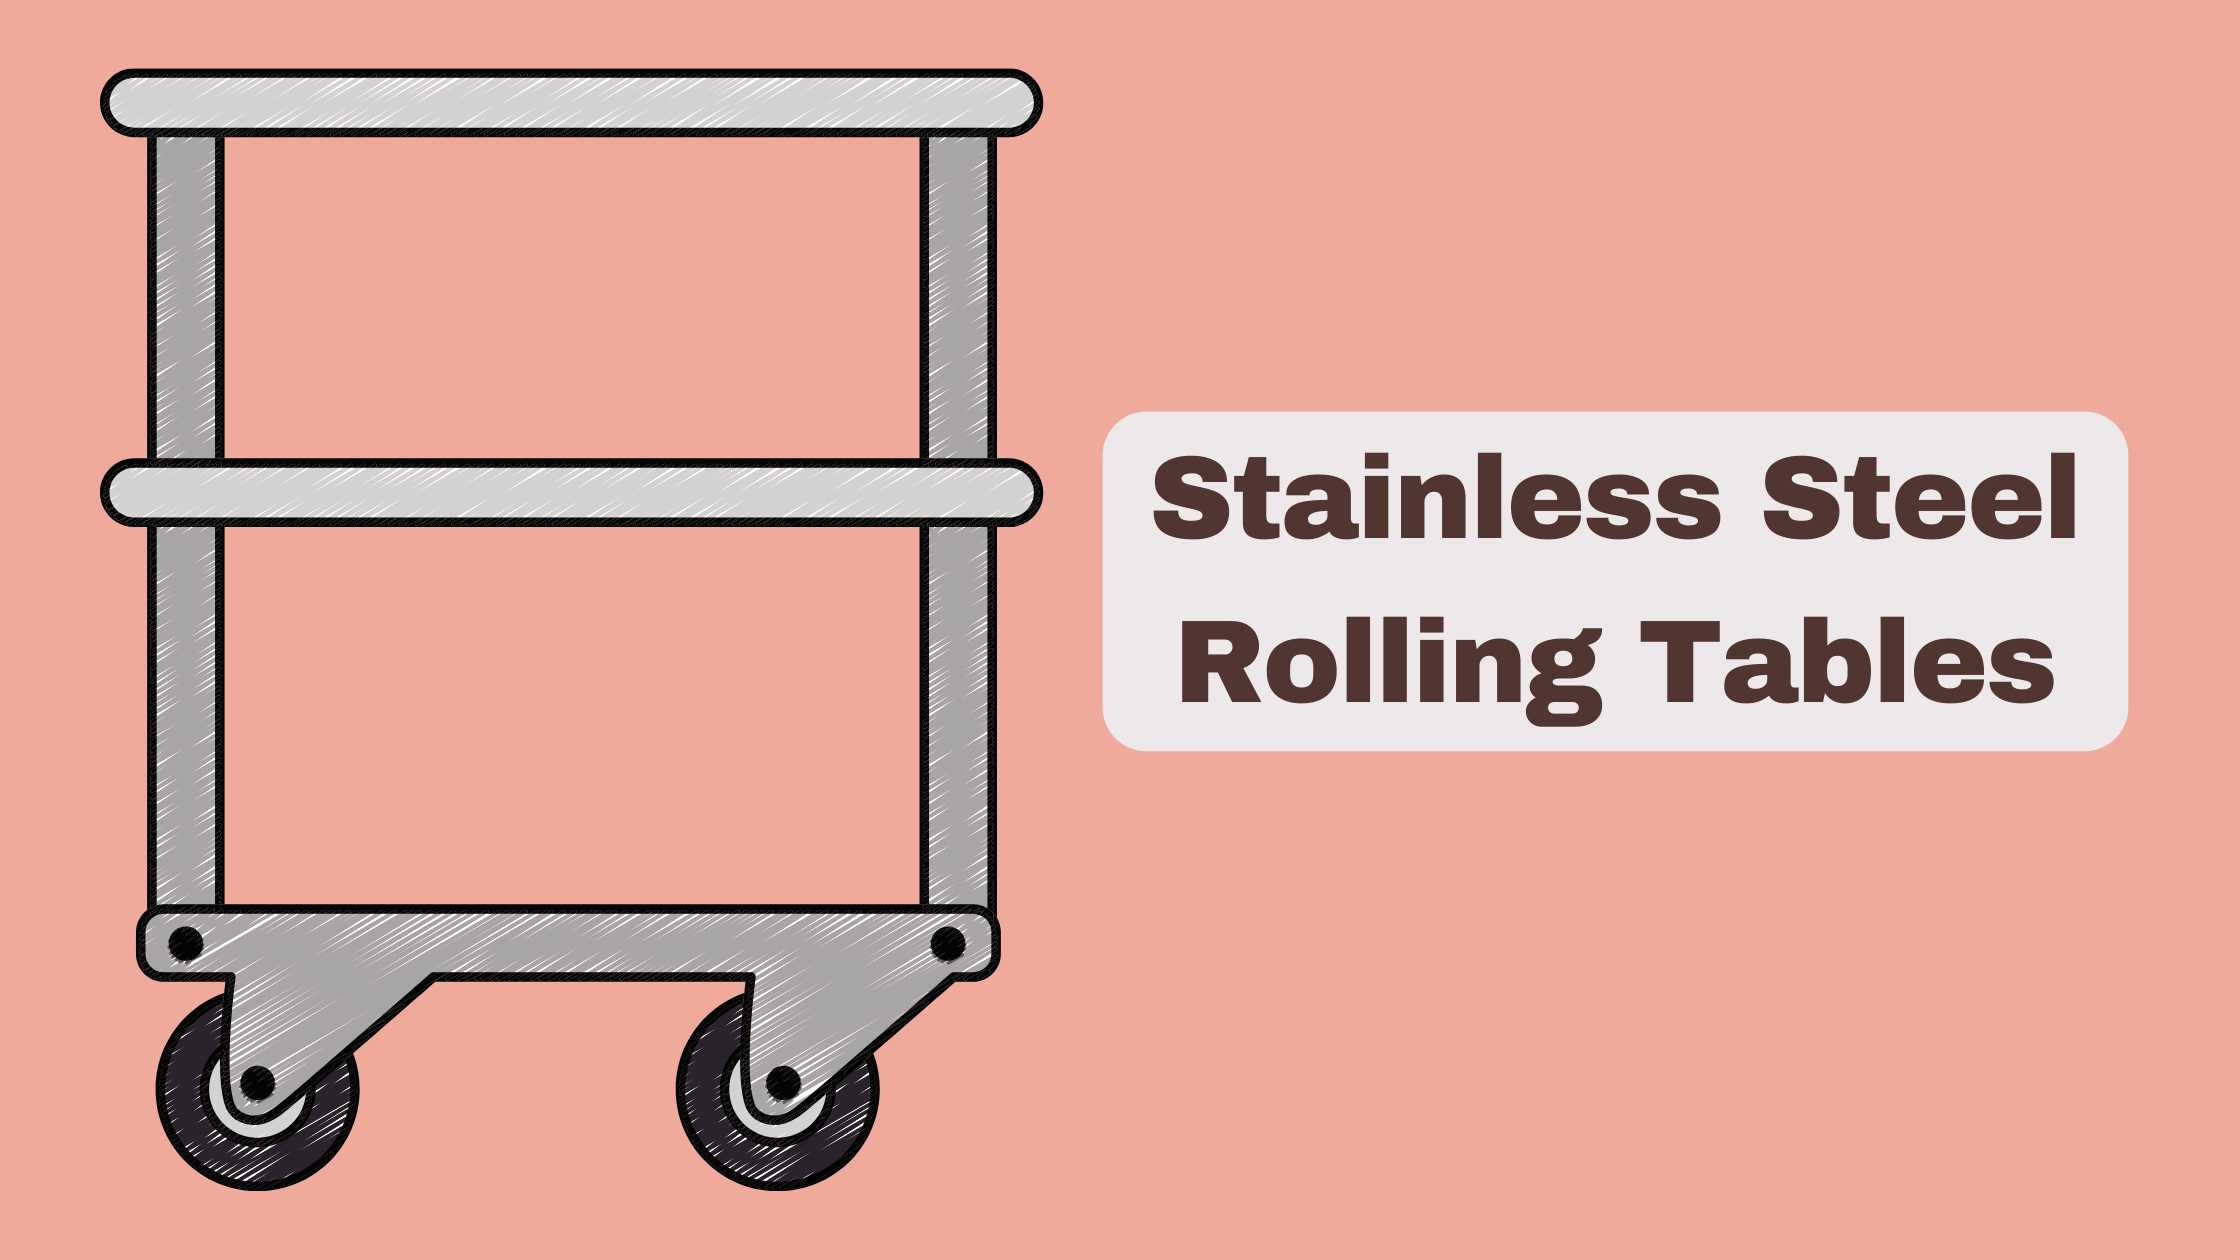 Stainless Steel Rolling Tables